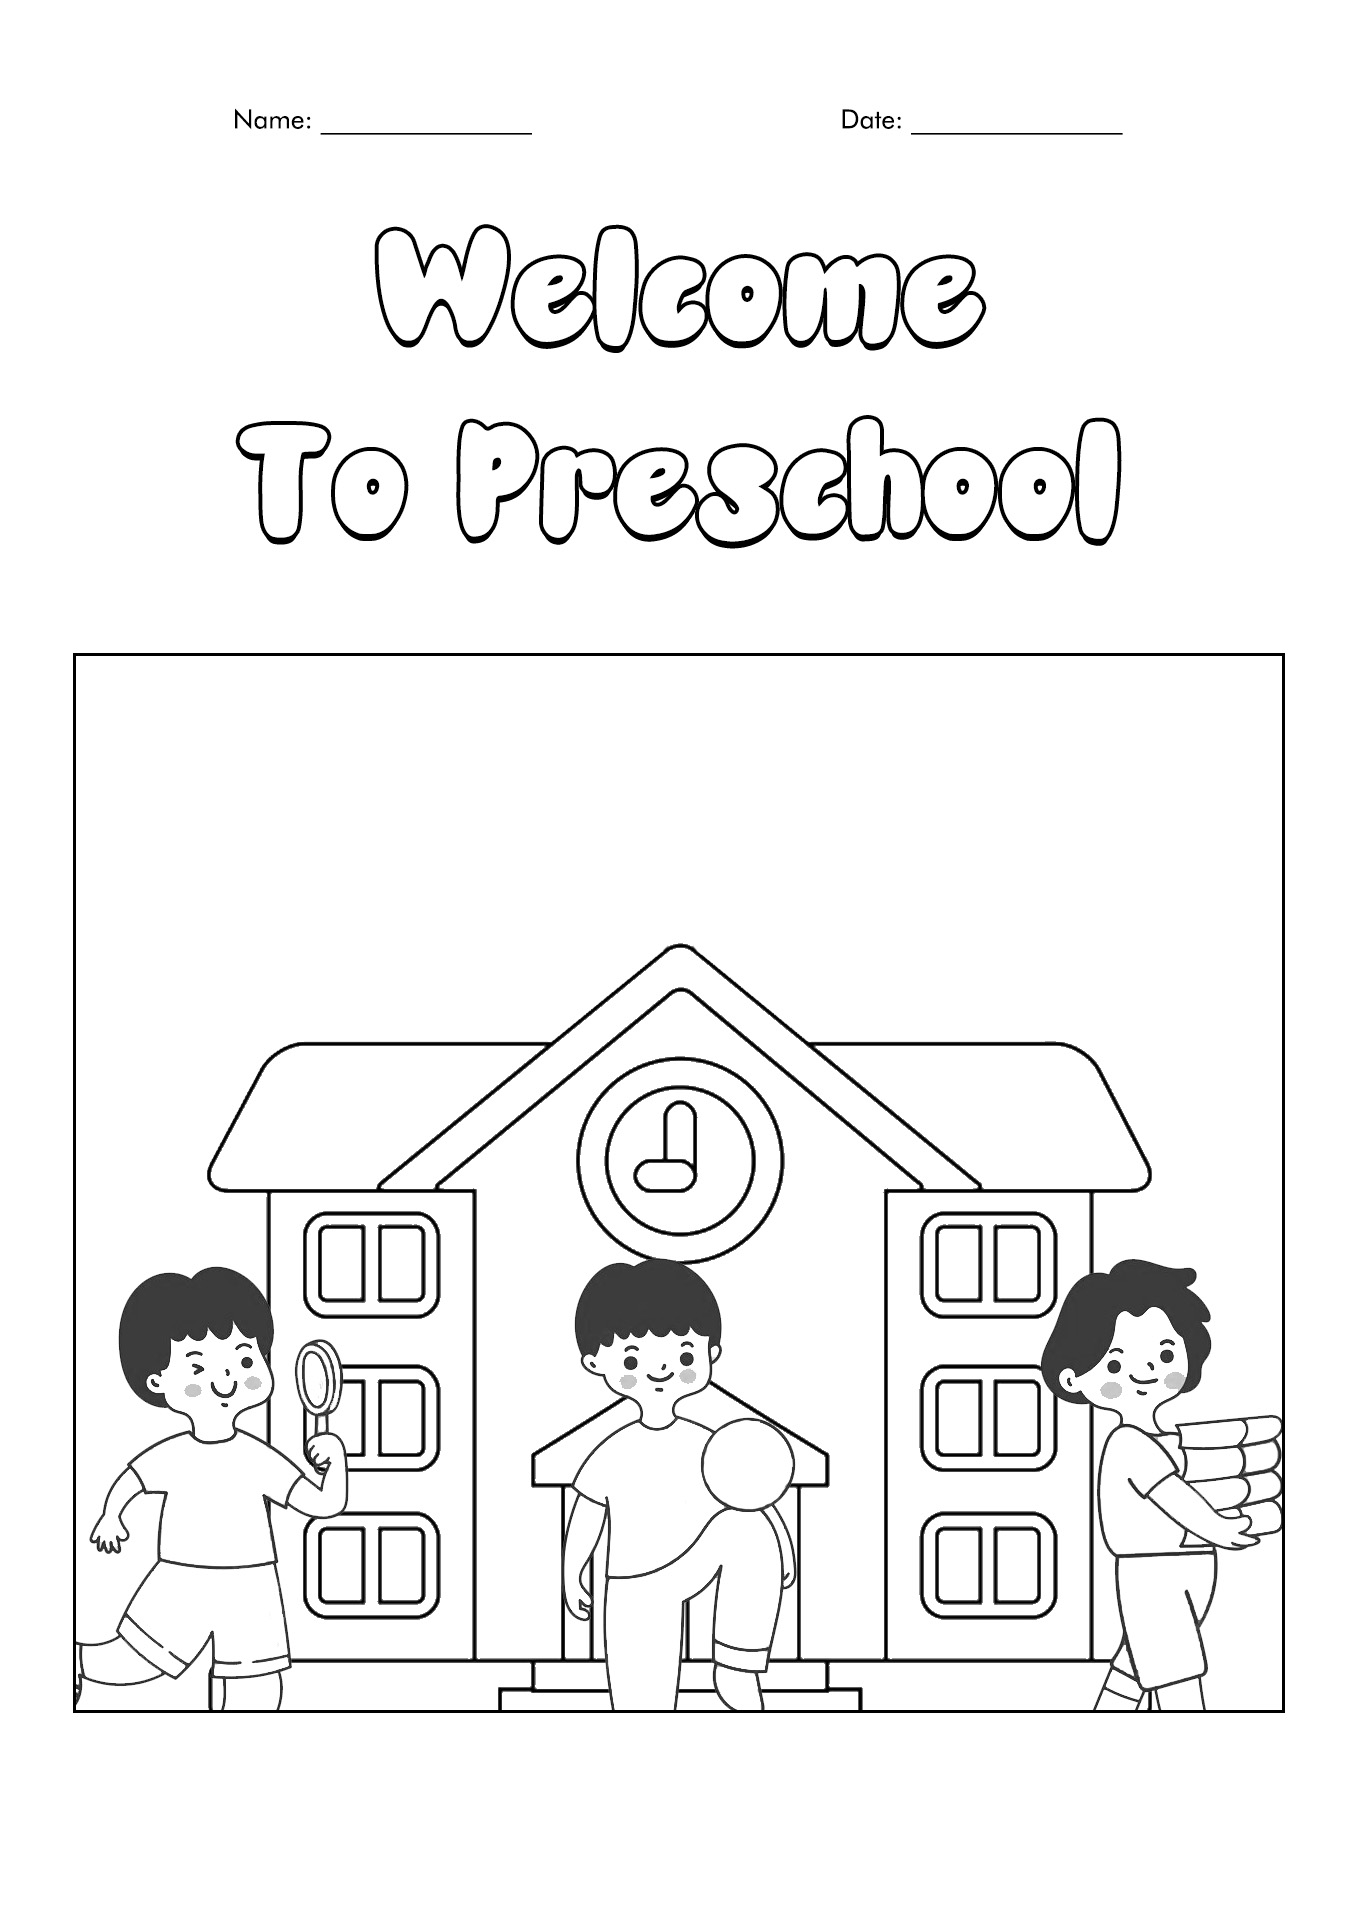 Welcome to Preschool Coloring Pages Image